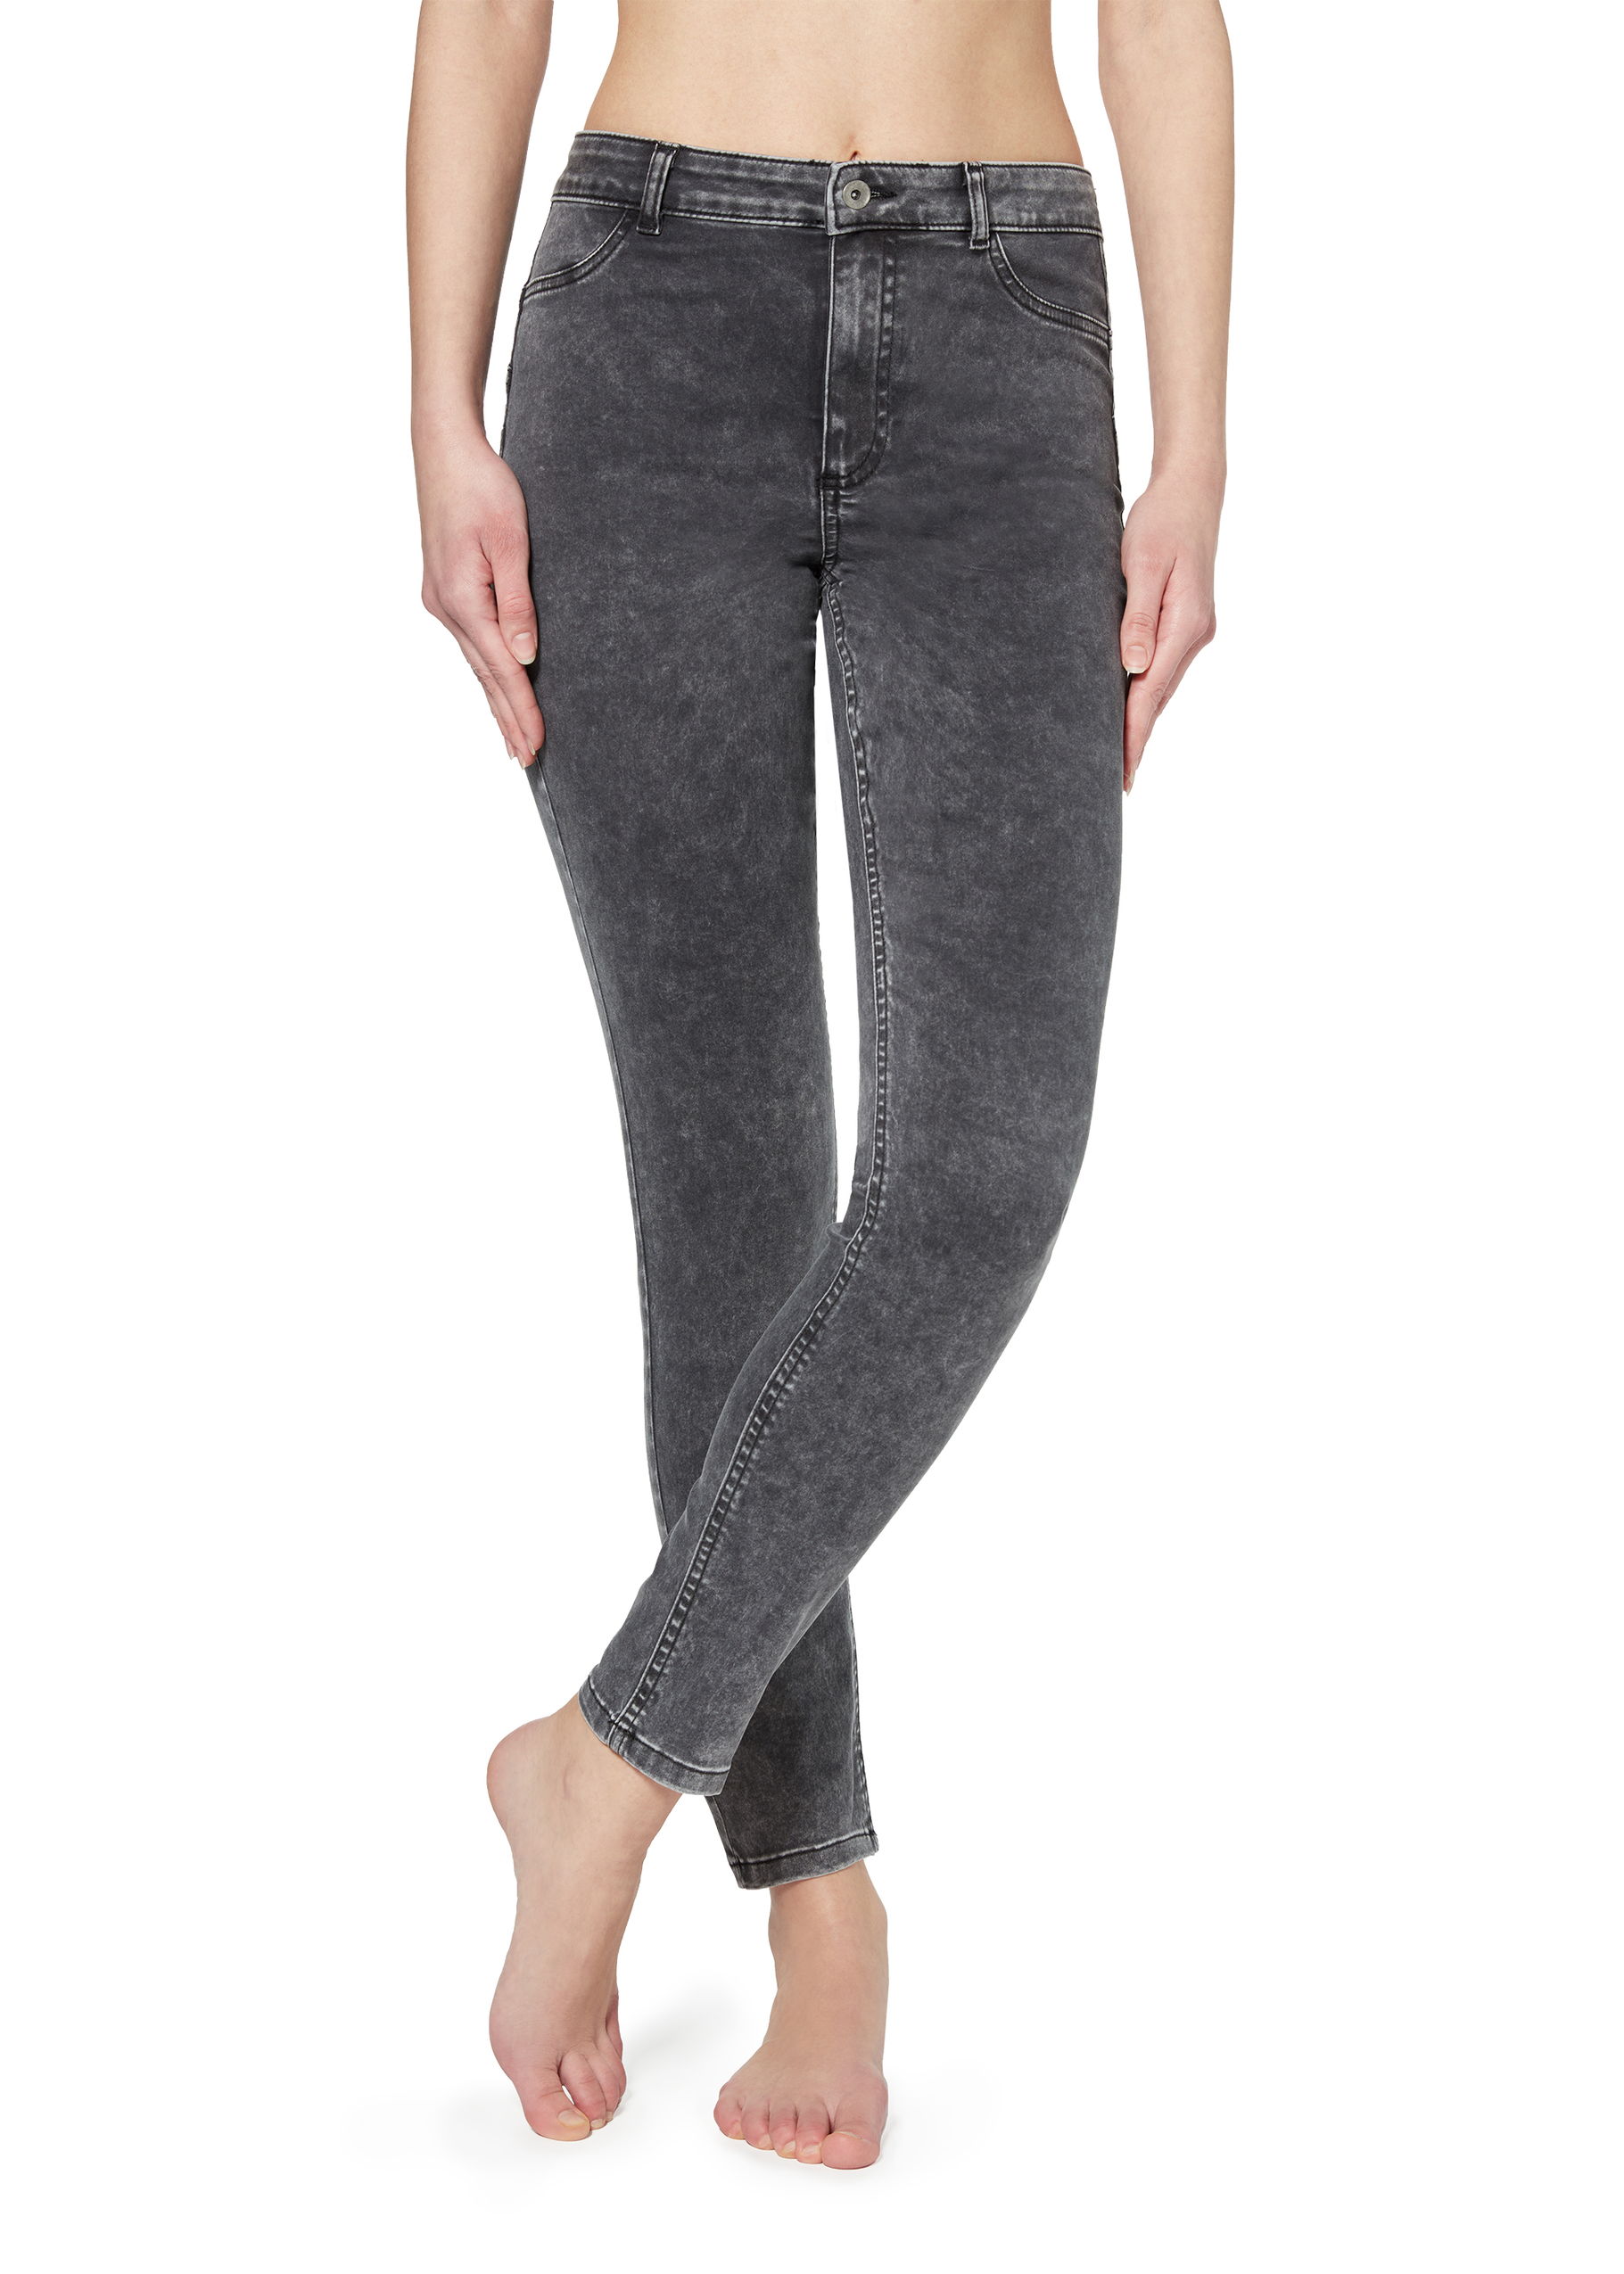 Leggings Push Up Calzedonia Jeans For Men Over 50